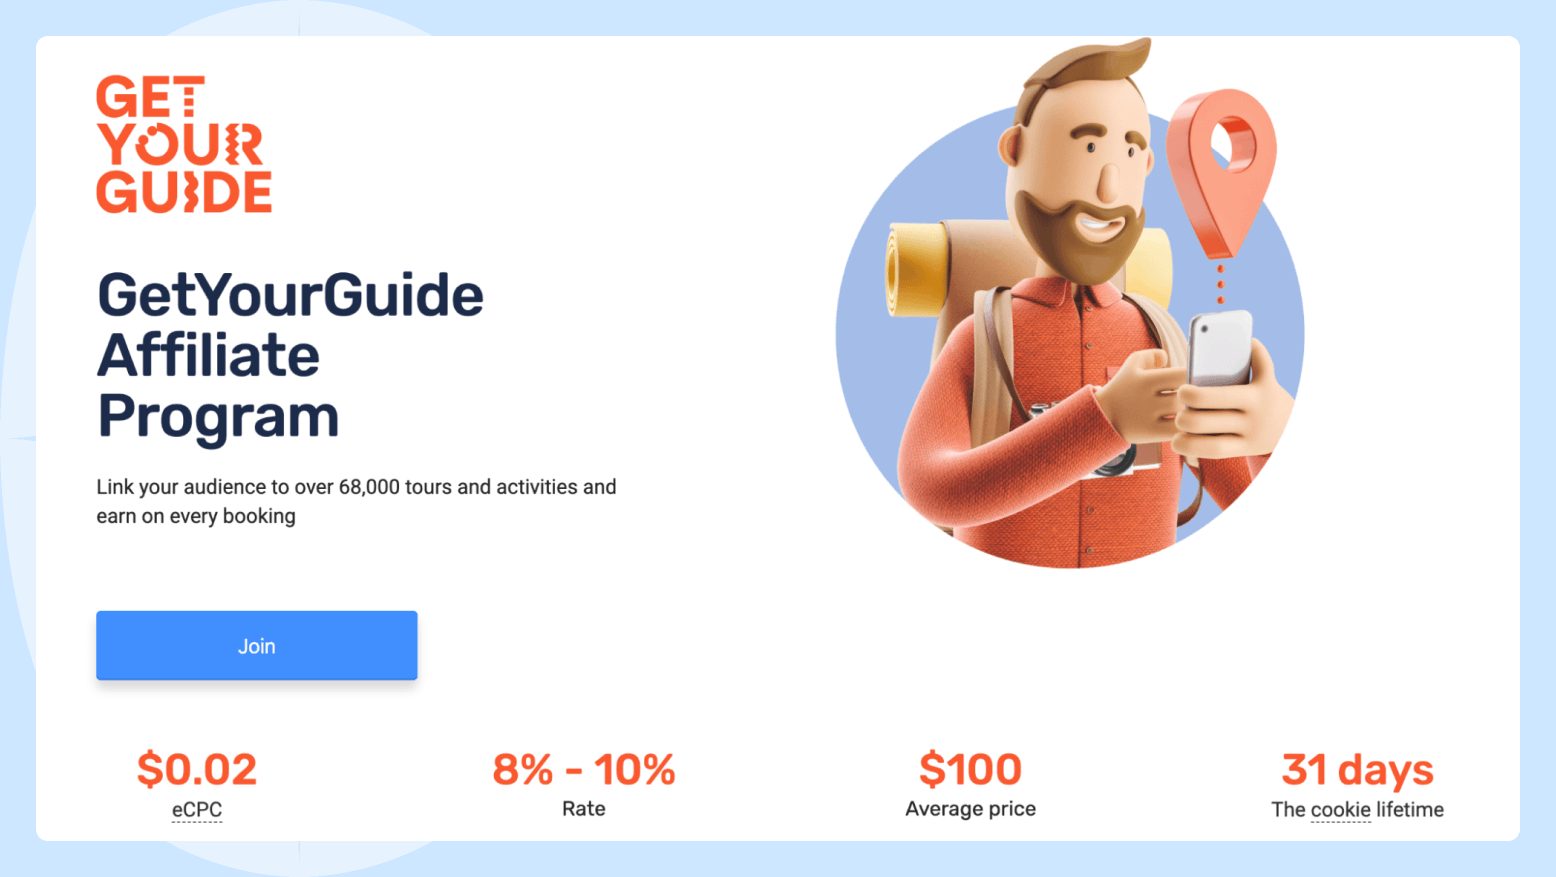 Screenshot of the GetYourGuide affiliate program page featuring a cartoon man holding a smartphone.